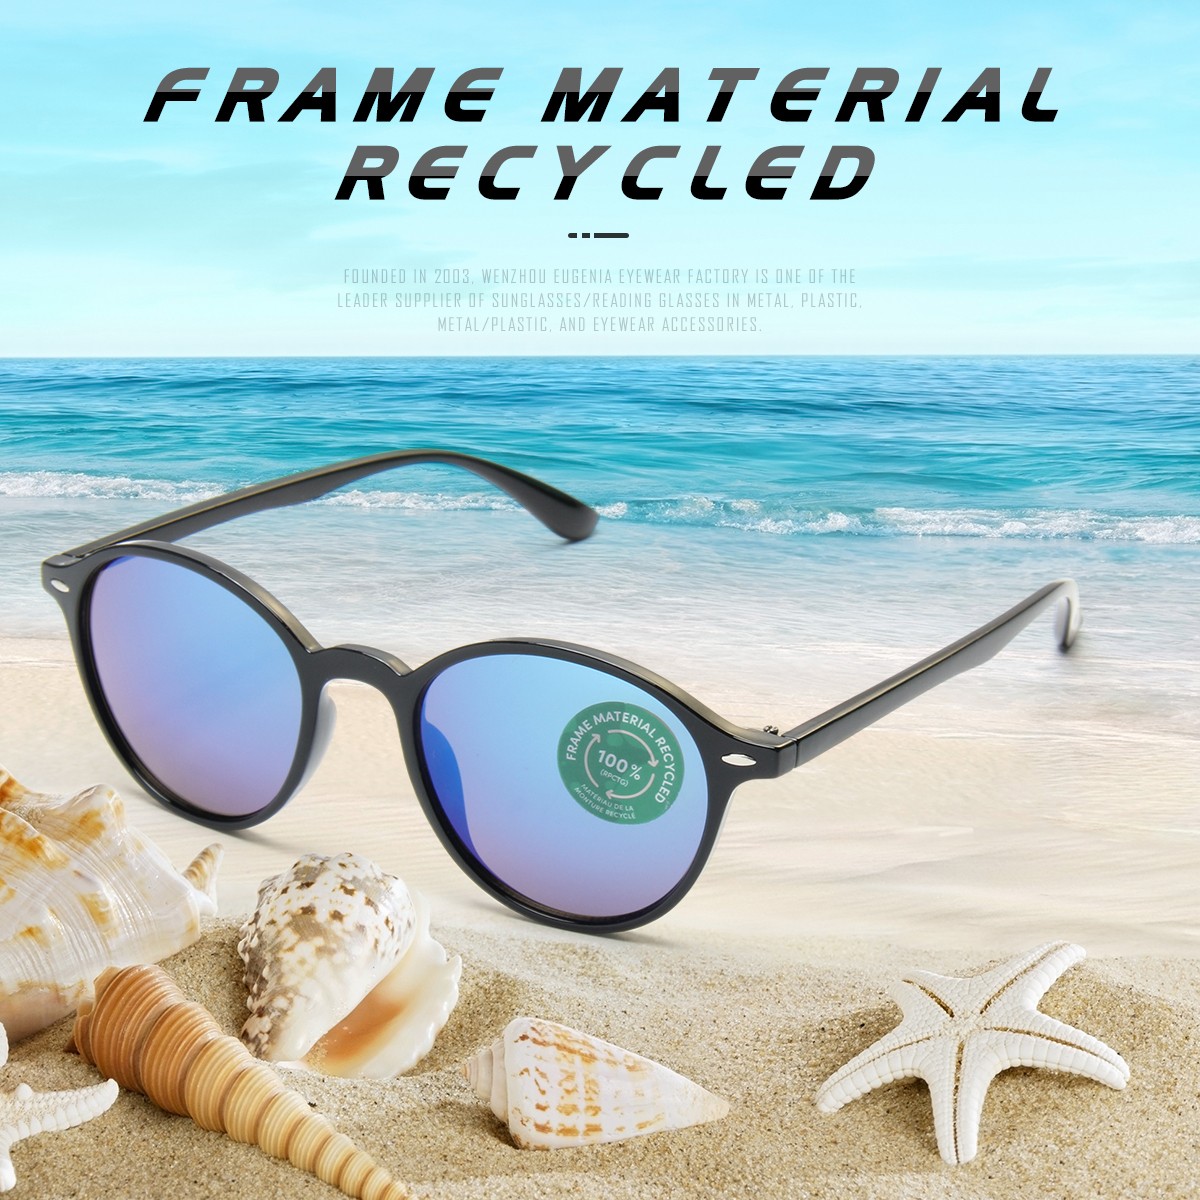 Eugenia highly-rated eco friendly sunglasses overseas market for Decoration-1